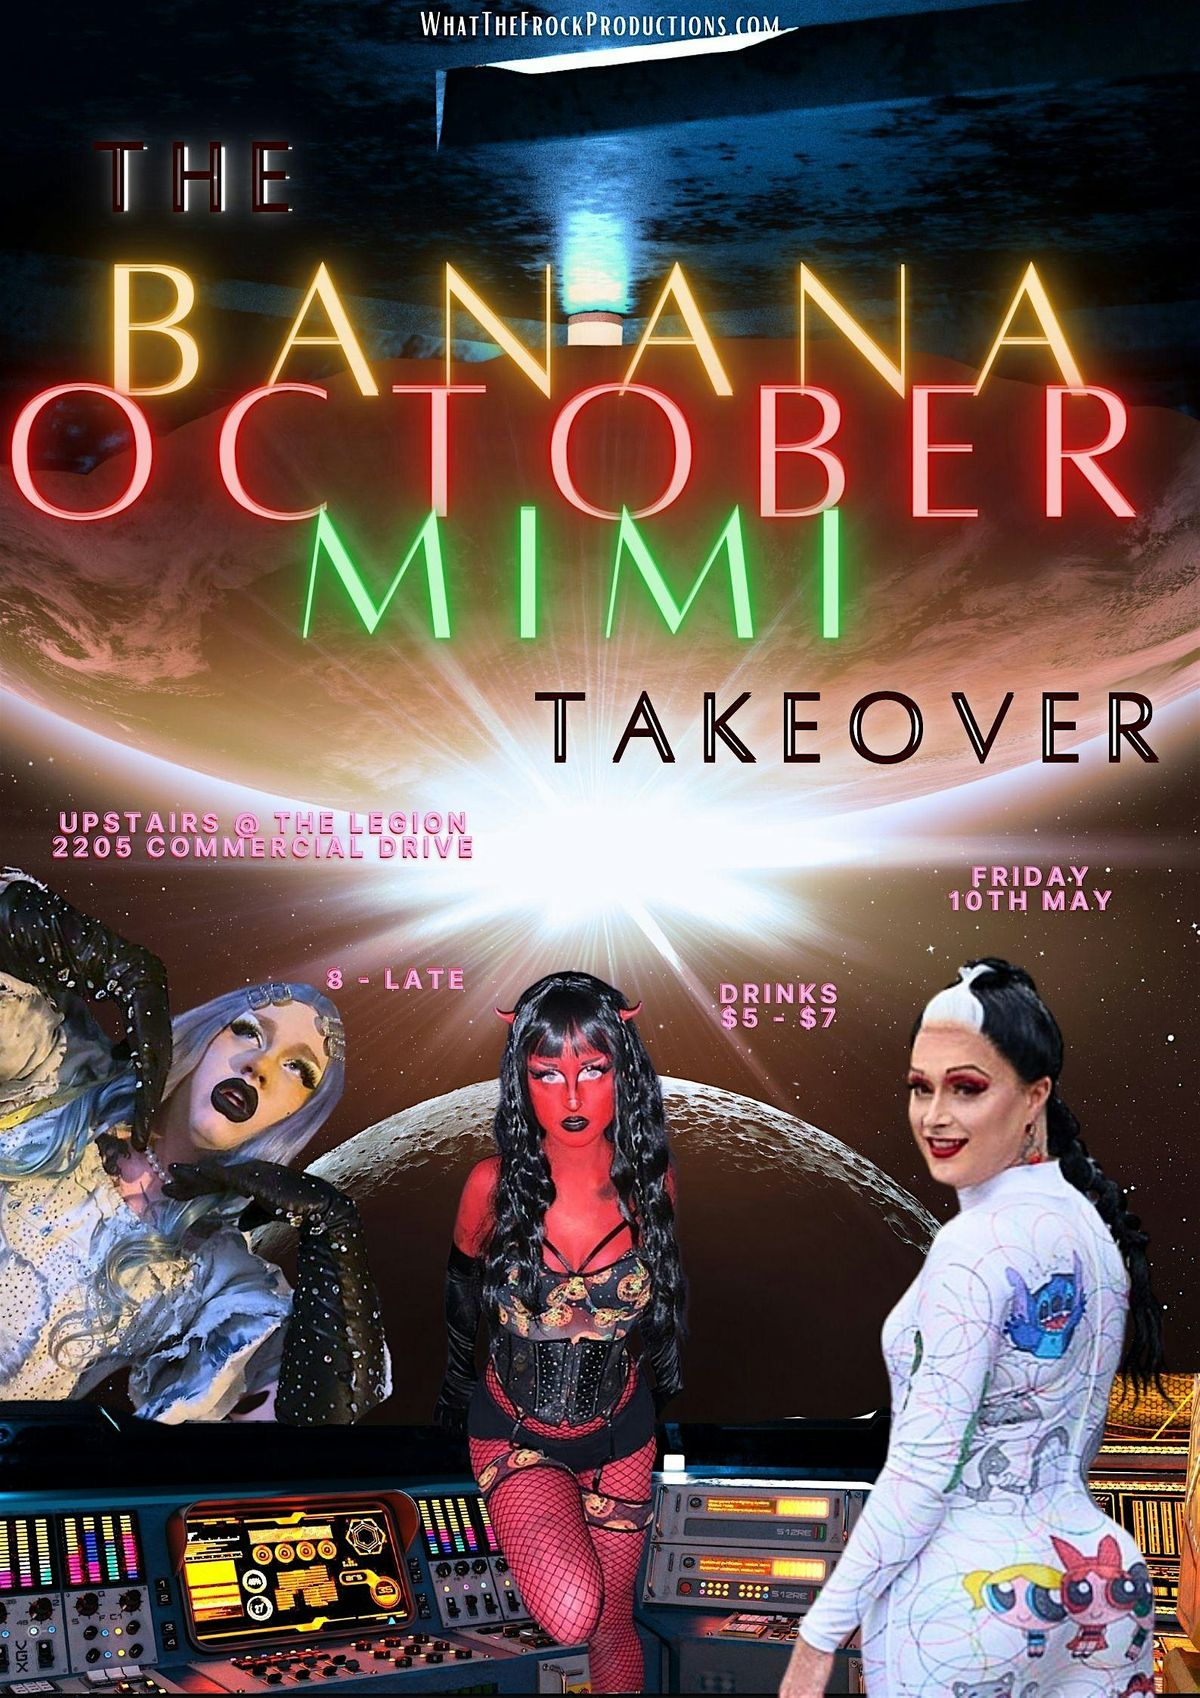 The Banana October Mimi Takeover - A Unique Drag Experience